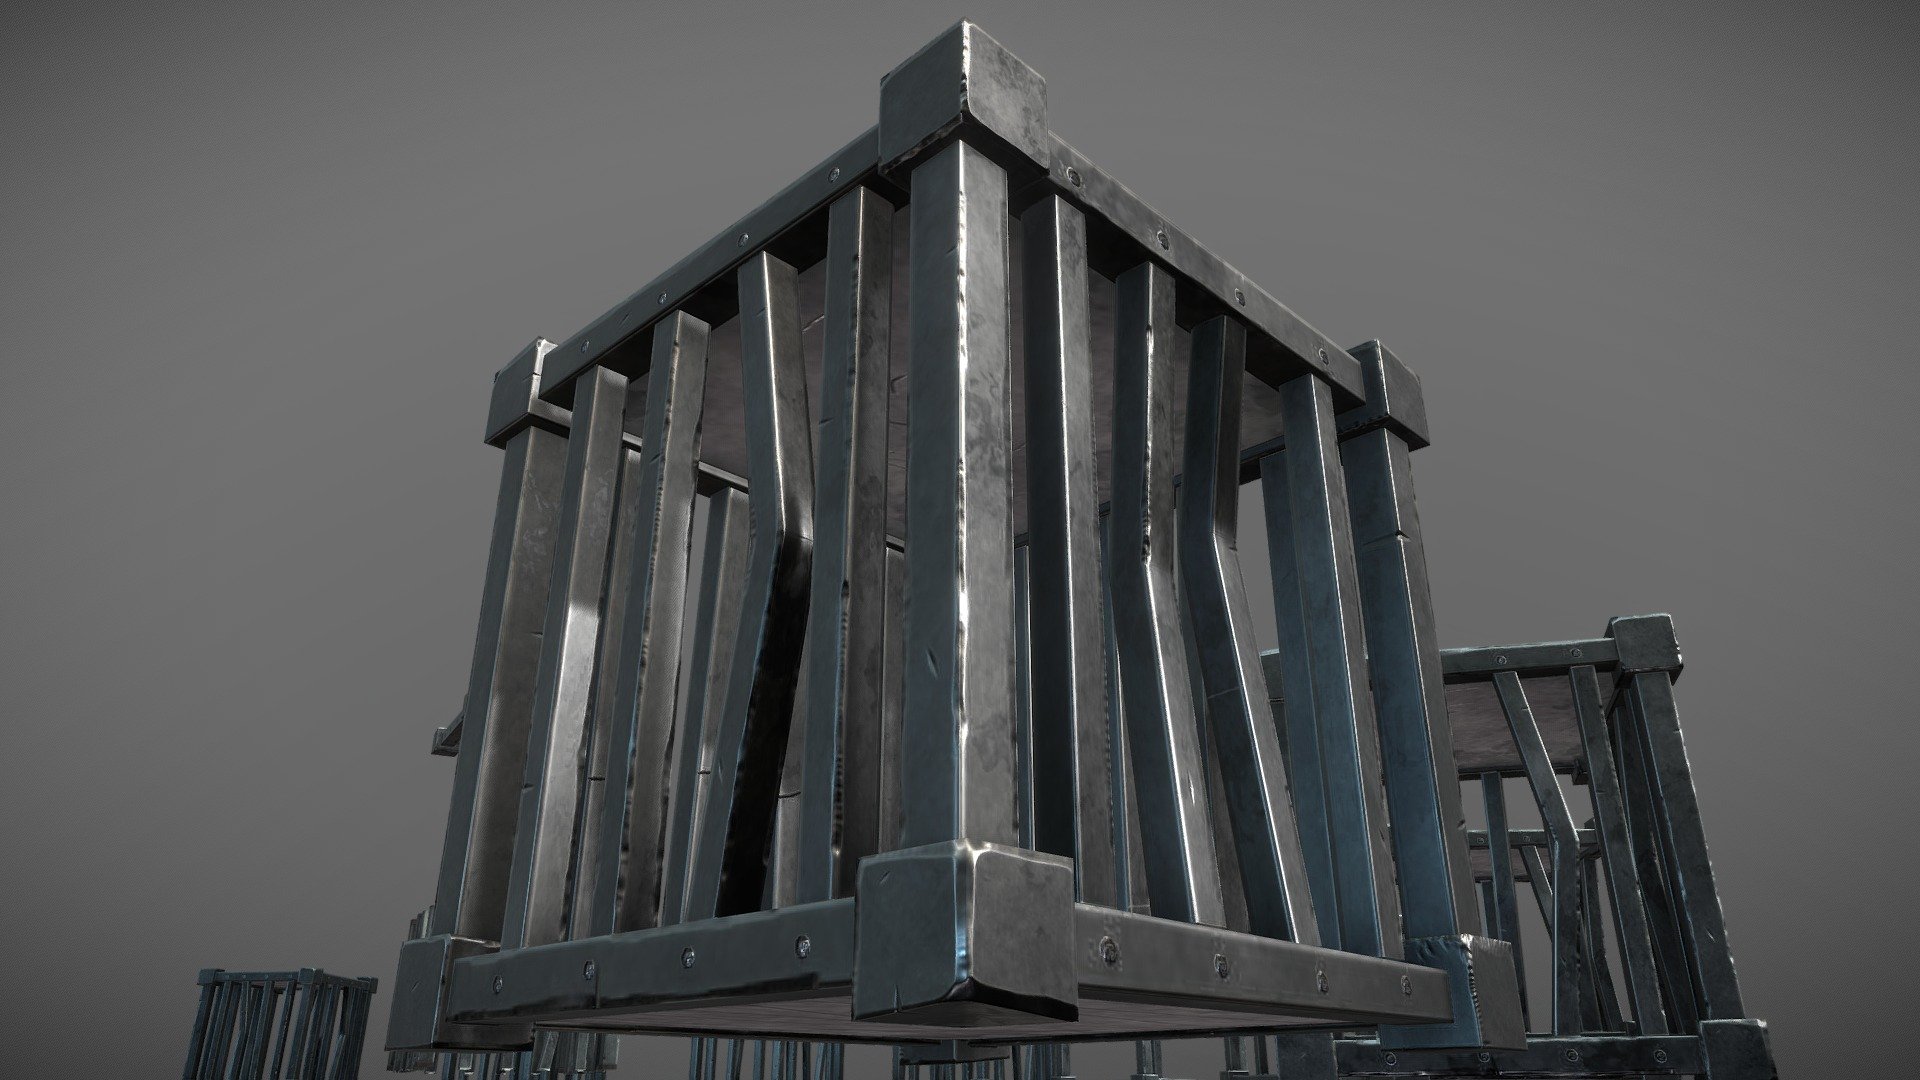 All metal variation available here: https://sketchfab.com/3d-models/stylized-cage-metal-b2b701e0f2a743c28c4009ed6c81c158

Stylized Cage Wood Metal Pack




2K Textures - PBR - [BaseColor, Metallic, Normal, Occlussion and Roughness]

UV Unwrapped

FBX [Scene + Individual Exports at origin 0, 0, 0]

Blend File Included [Scene + Individual Exports at origin 0, 0, 0]

This is an individual extract from my big Unreal Engine 4 Stylized PBR Dungeon Pack V2. Available too on CGTrader, Unreal Engine 4 Marketplace and the ArtStation Store.

Check more info about the entire pack here if you are interested: https://www.artstation.com/artwork/Po9PJo

Entire Asset Pack for UE4 [4.26.0] + FBX + Blend Files available in the in the ArtStation Store too: https://artstn.co/m/wwMv7

Unreal Engine Marketplace Stylized Dungeon Pack Page. [Buy this if you want the Unreal version only]: https://www.unrealengine.com/marketplace/en-US/product/stylized-pbr-dungeon-pack-jfg - Stylized PBR Cage Wood Metal Pack - Buy Royalty Free 3D model by Jesus Fernandez Garcia (@jamyzgenius) 3d model